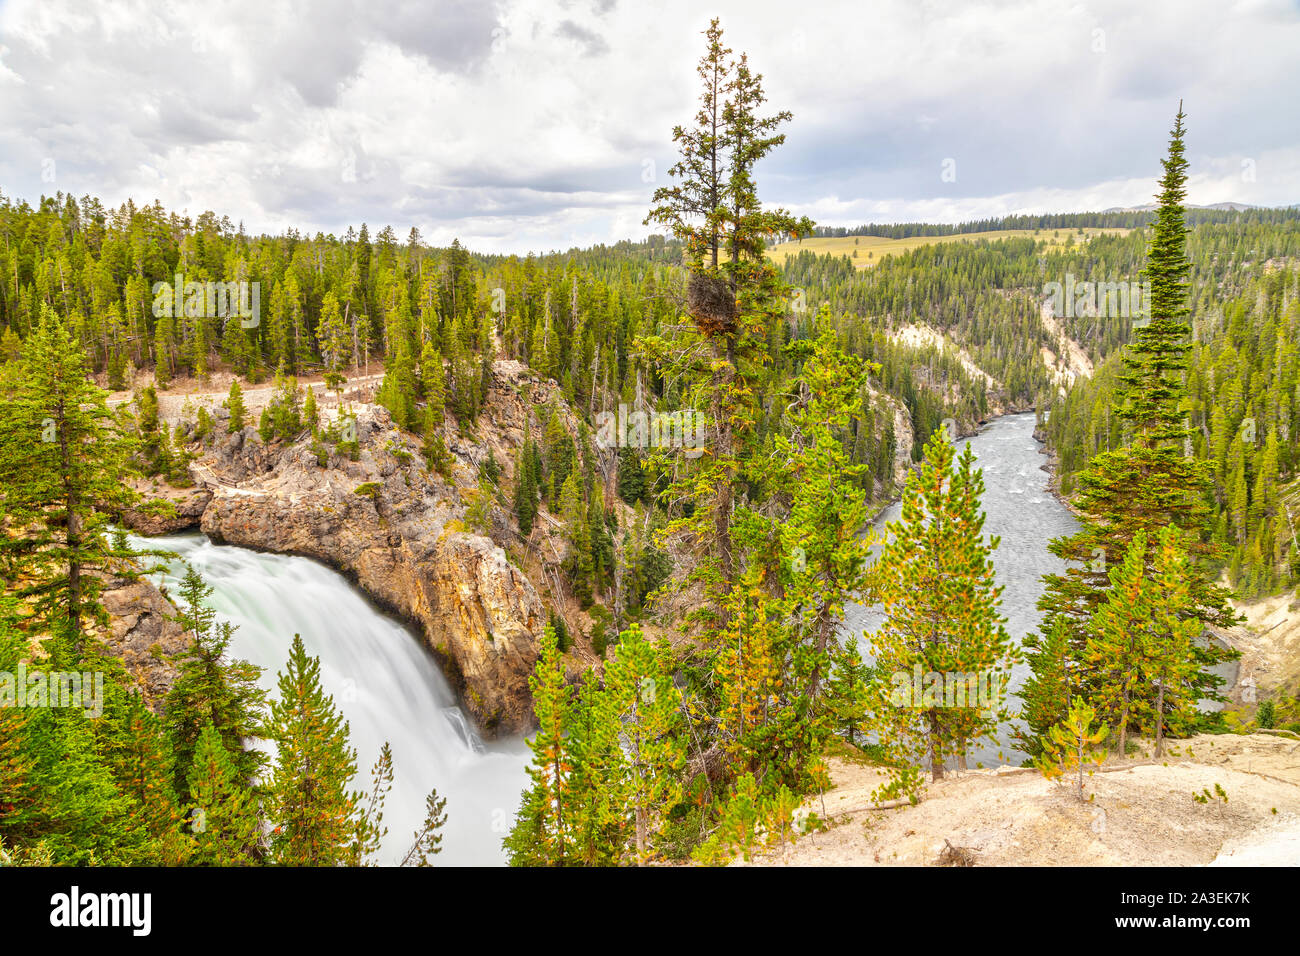 Upper Falls flowing into Yellowstone River in Yellowstone National Park, Wyoming, USA. Stock Photo